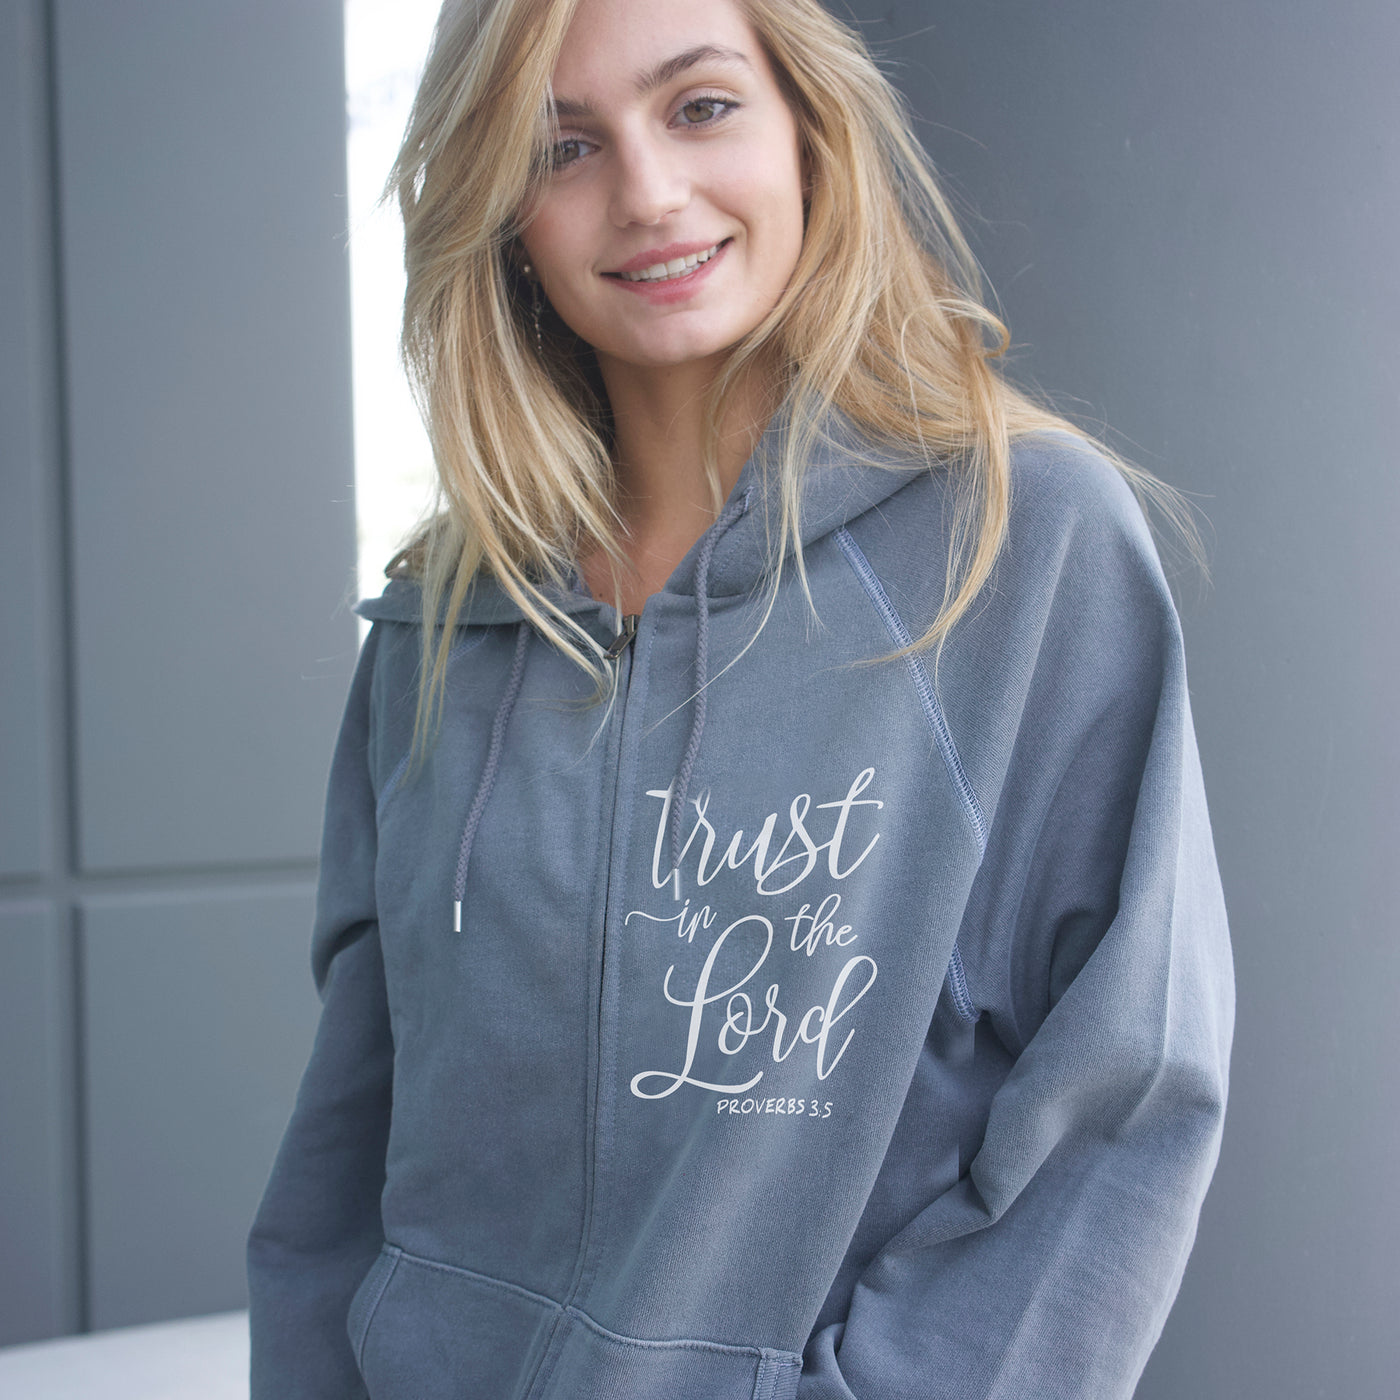 Proverbs 3:5 Bible Verse Zip Up Hoodie-Good Work(s) Make A Difference® | Christian and Inspirational Jewelry Company in Vernon, California